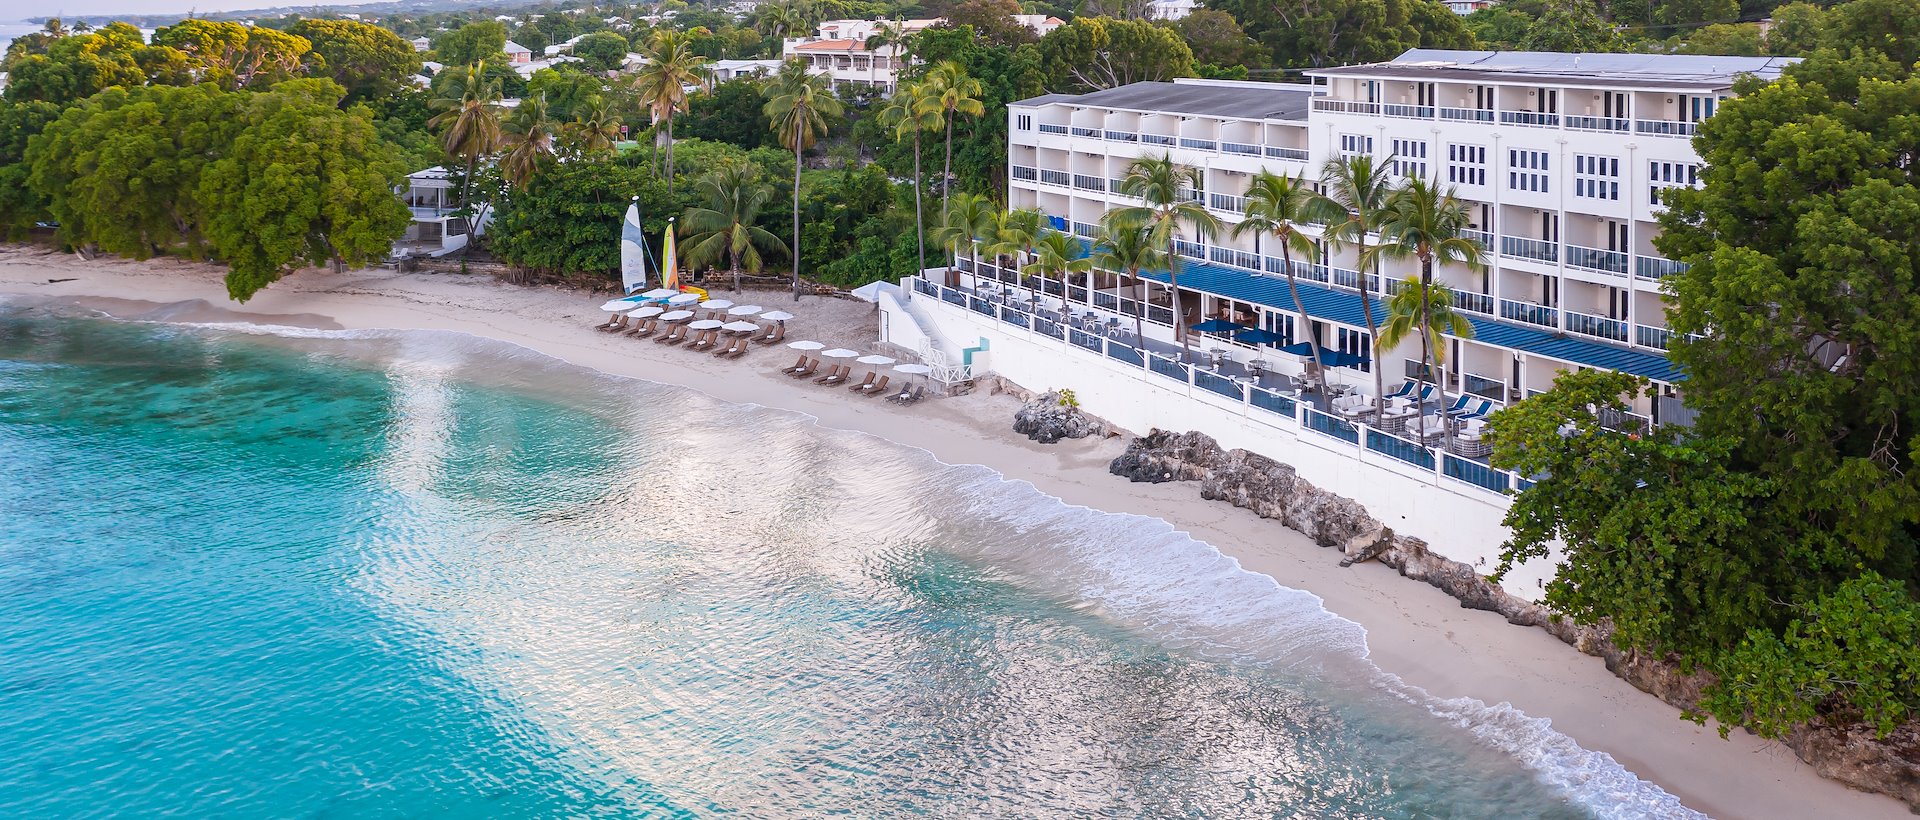 All-Inclusive Waves Hotel & Spa